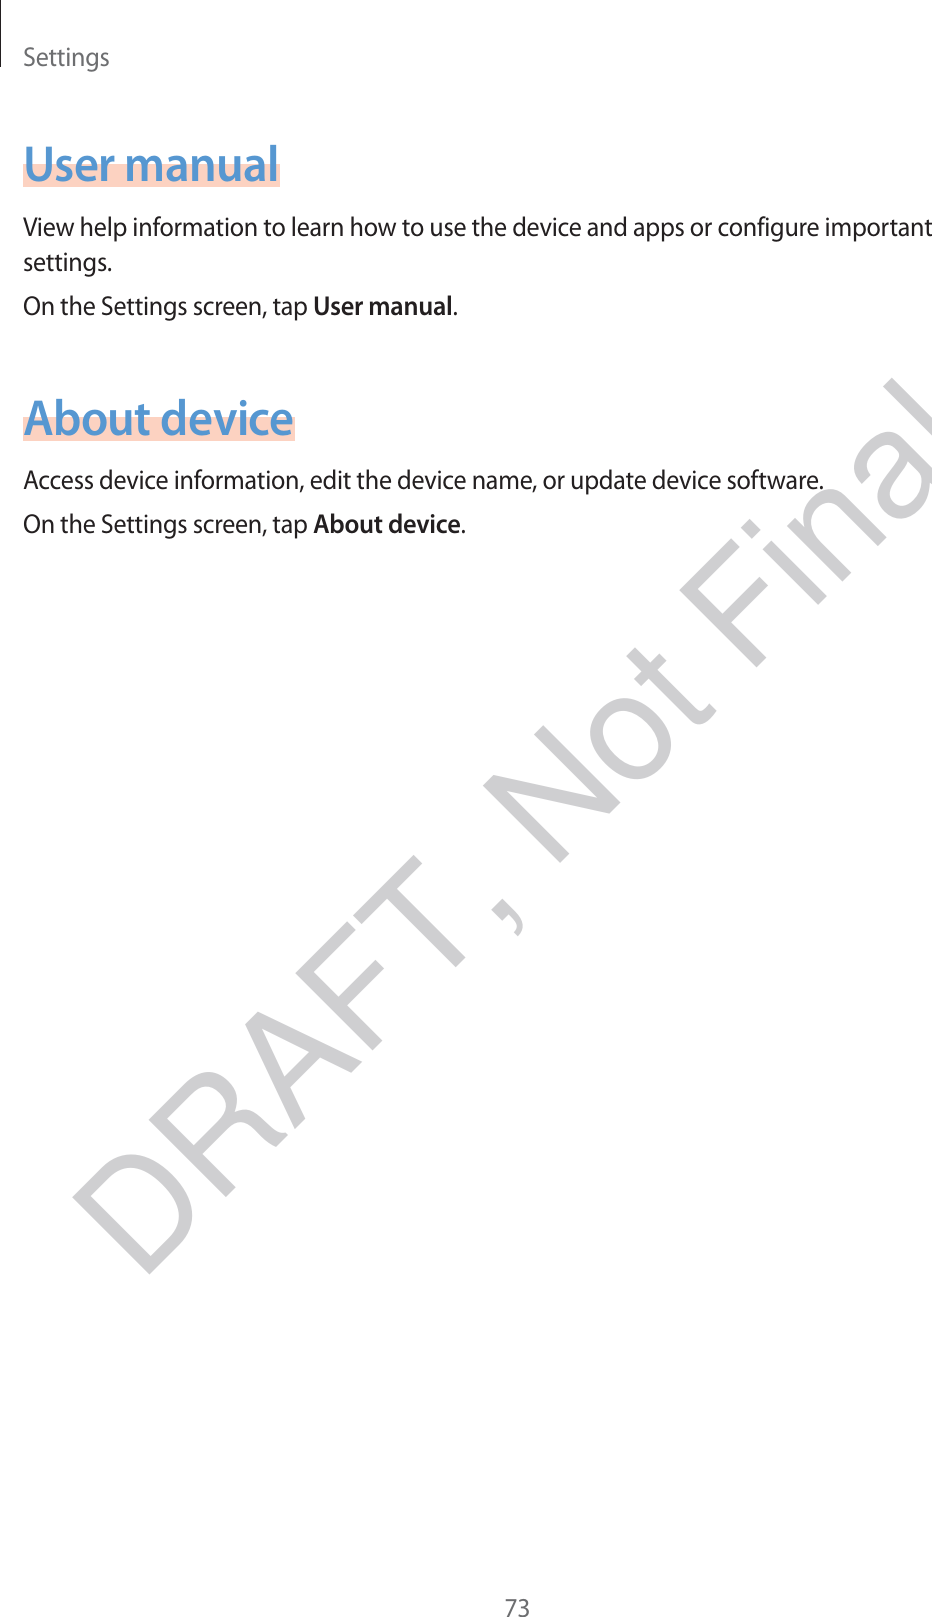 Settings73User manualView help information to learn how to use the device and apps or configure important settings.On the Settings screen, tap User manual.About deviceAccess device information, edit the device name, or update device software.On the Settings screen, tap About device.DRAFT, Not Final